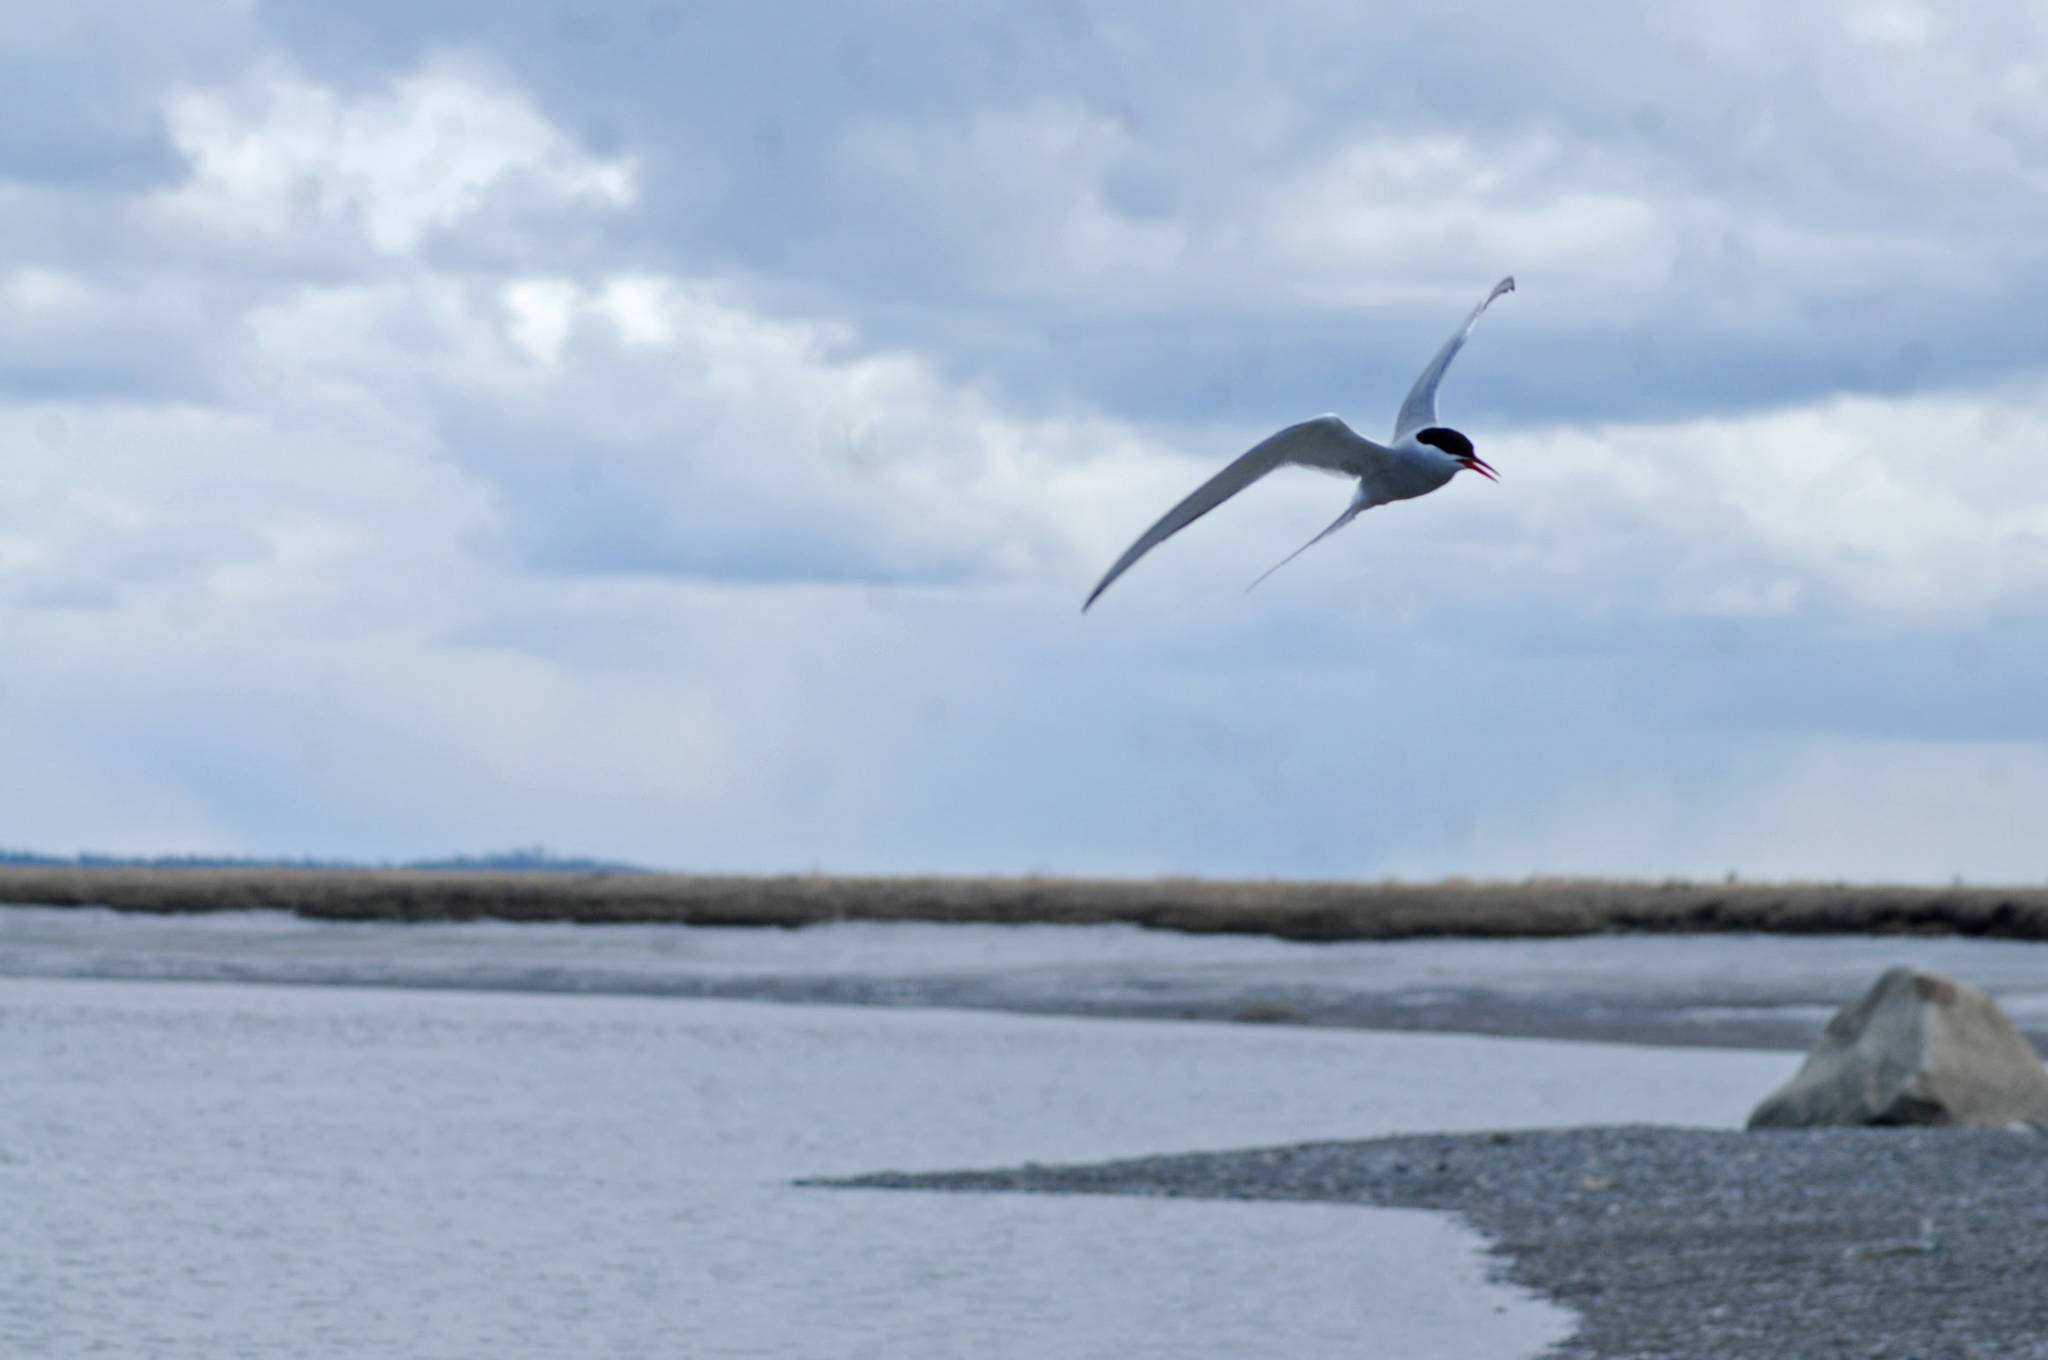 An Arctic tern swoops in search of fish on the banks of the Kenai River near the Warren Ames Bridge on Monday, May 14, 2018 in Kenai, Alaska. (Photo by Elizabeth Earl/Peninsula Clarion)